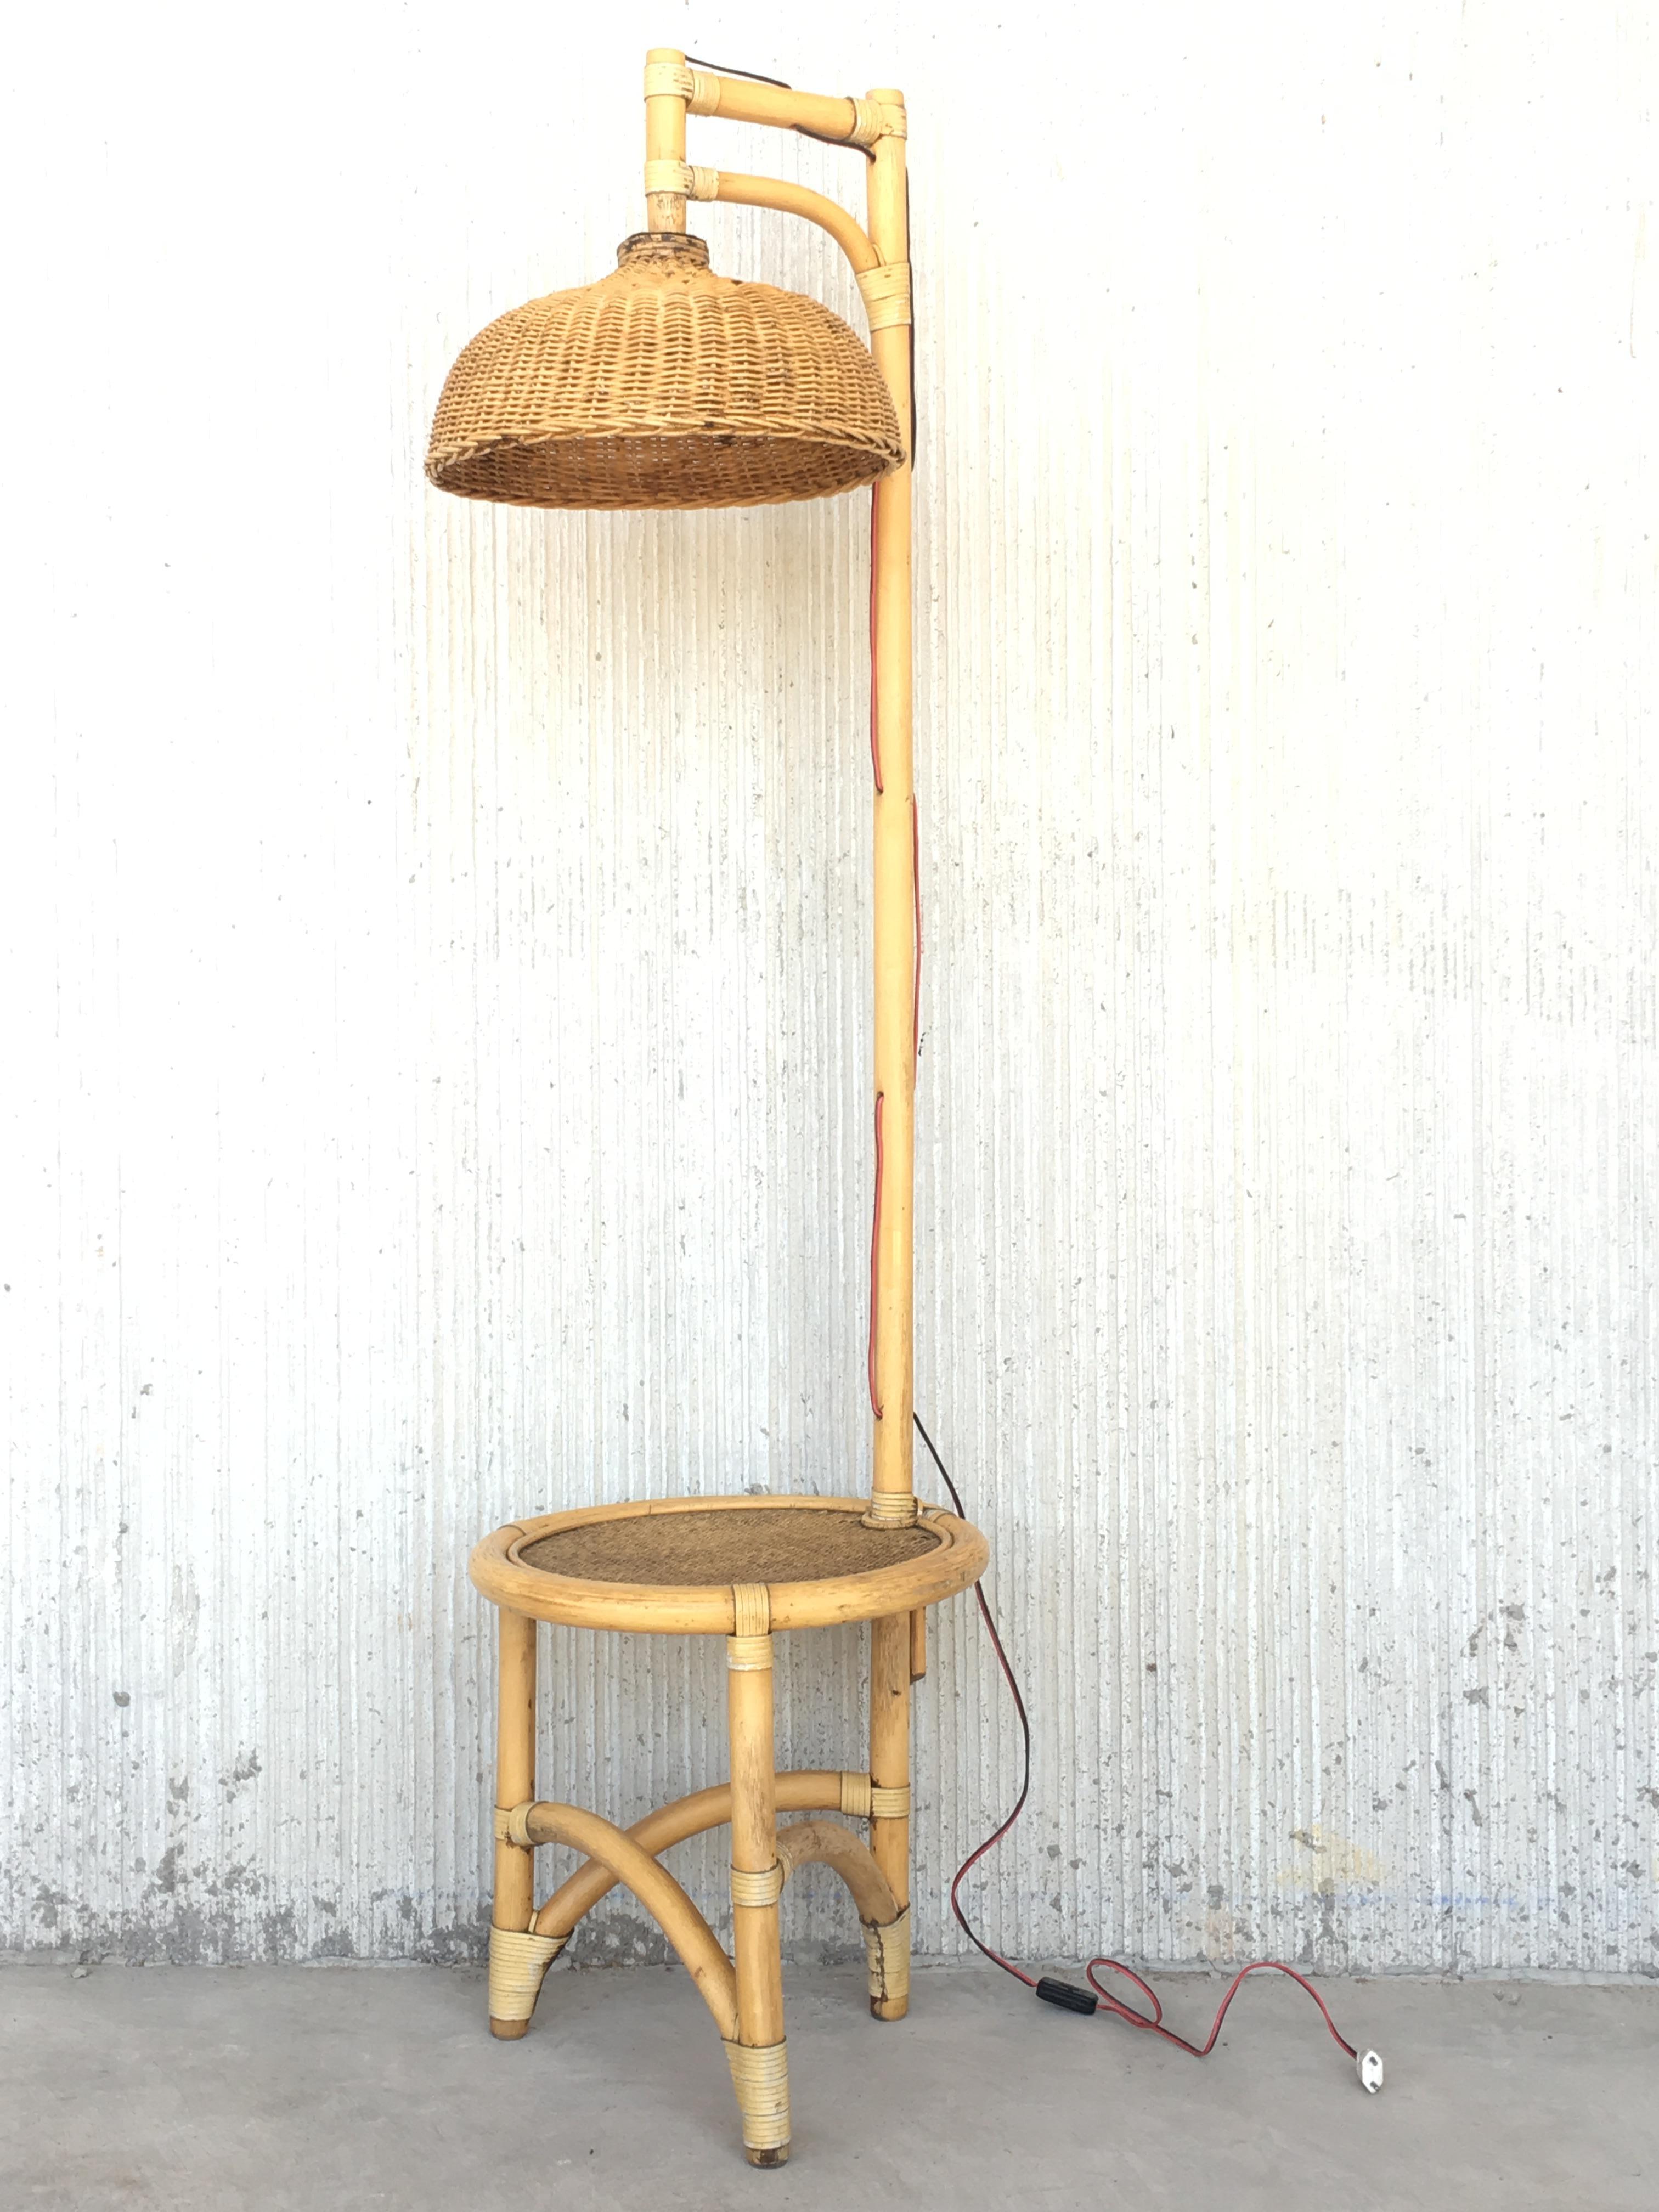 Laurel bamboo lamp with table.
Includes original Wicker lampshade.